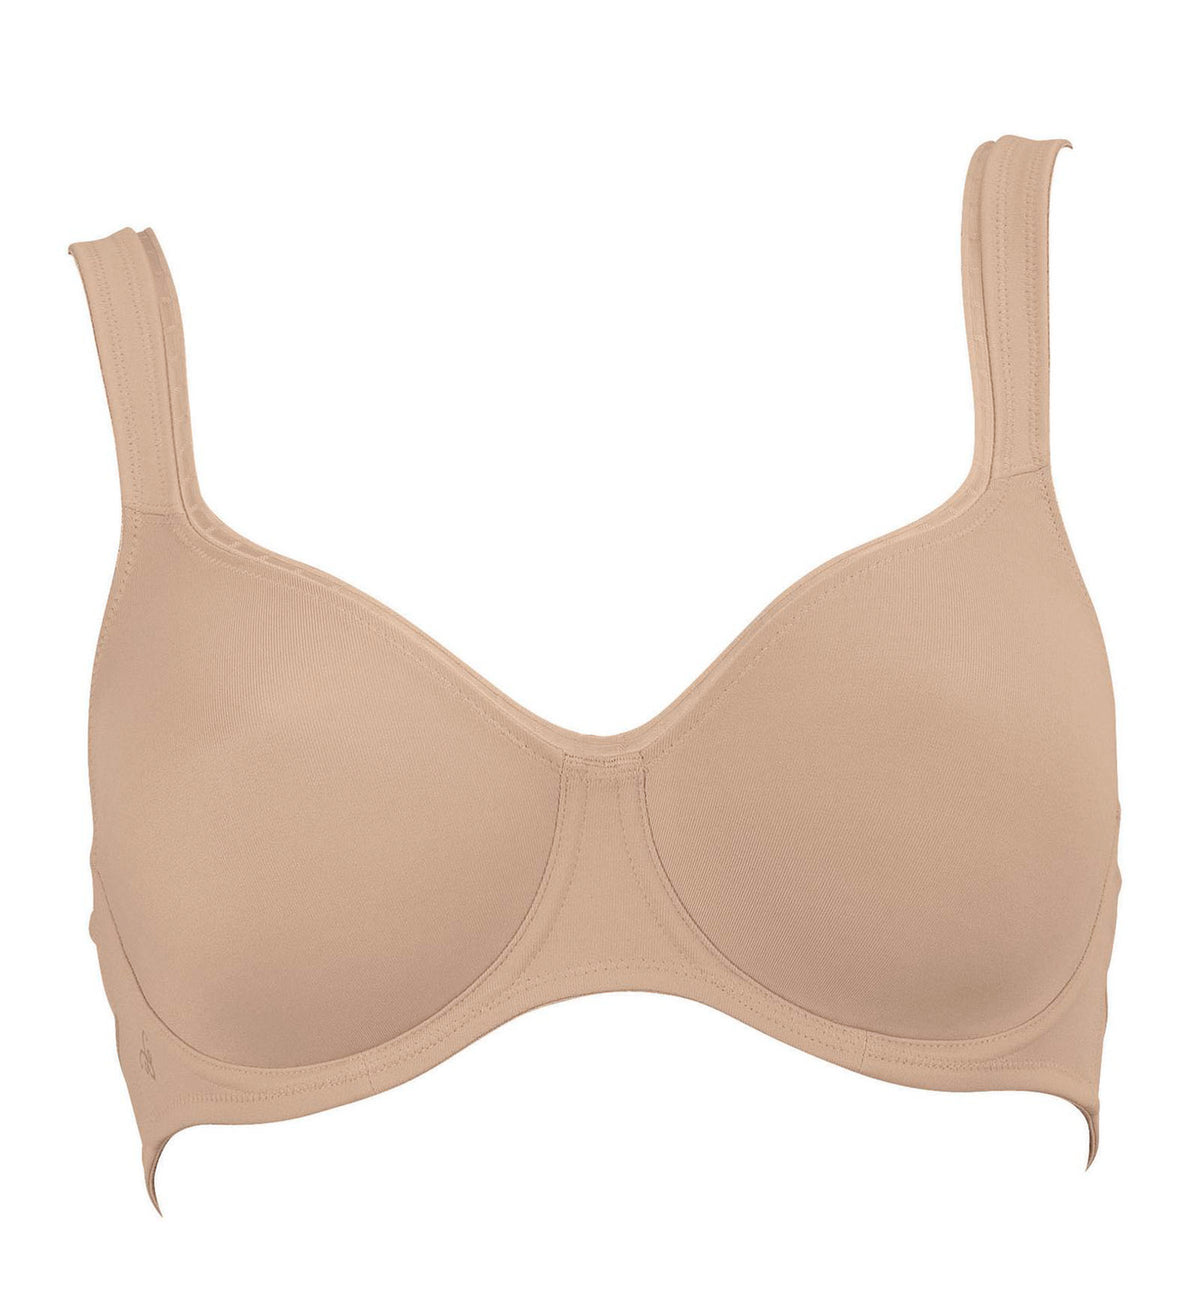 Rosa Faia by Anita Twin Firm Seamless Support Underwire Bra (5694),30D,Skin - Skin,30D